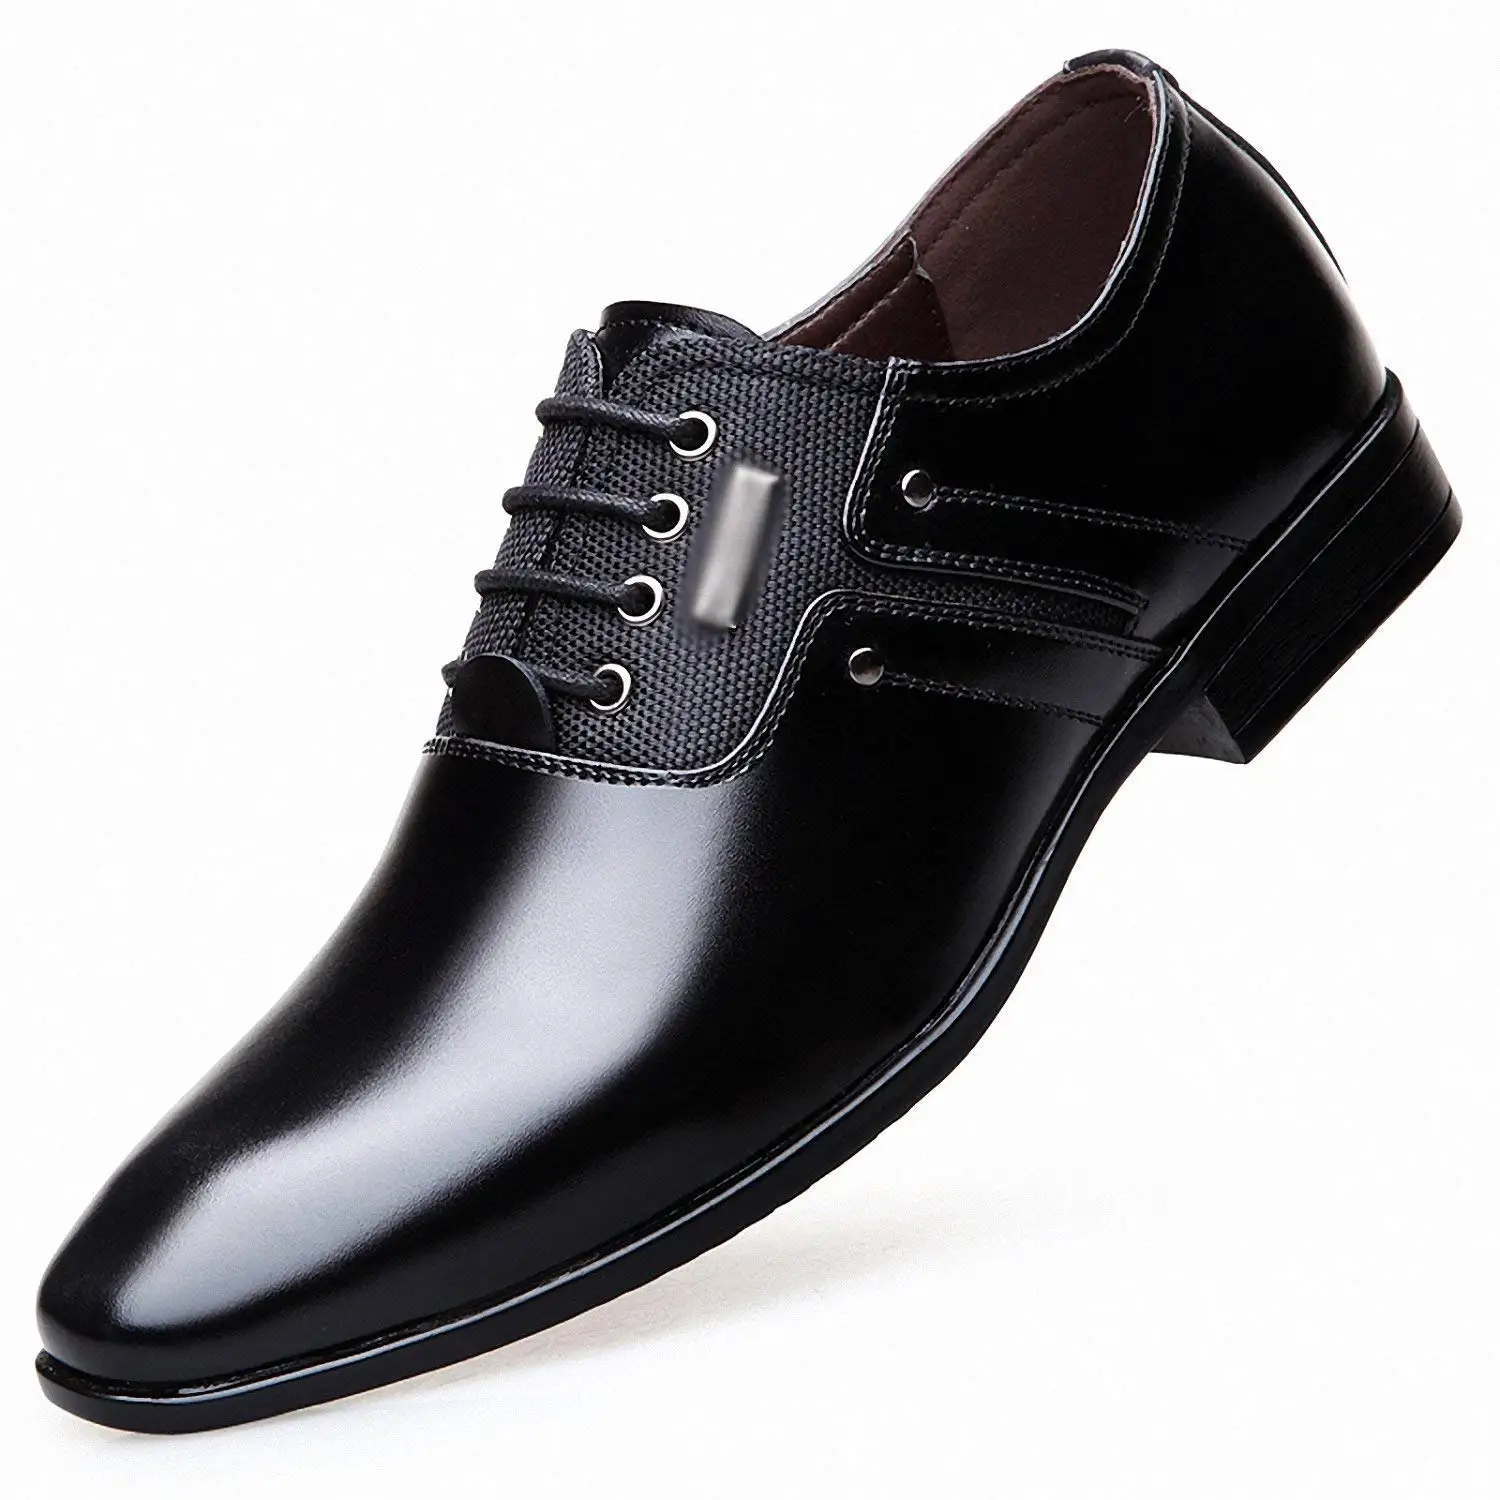 Cheap Formal Shoes Brand, find Formal Shoes Brand deals on line at ...